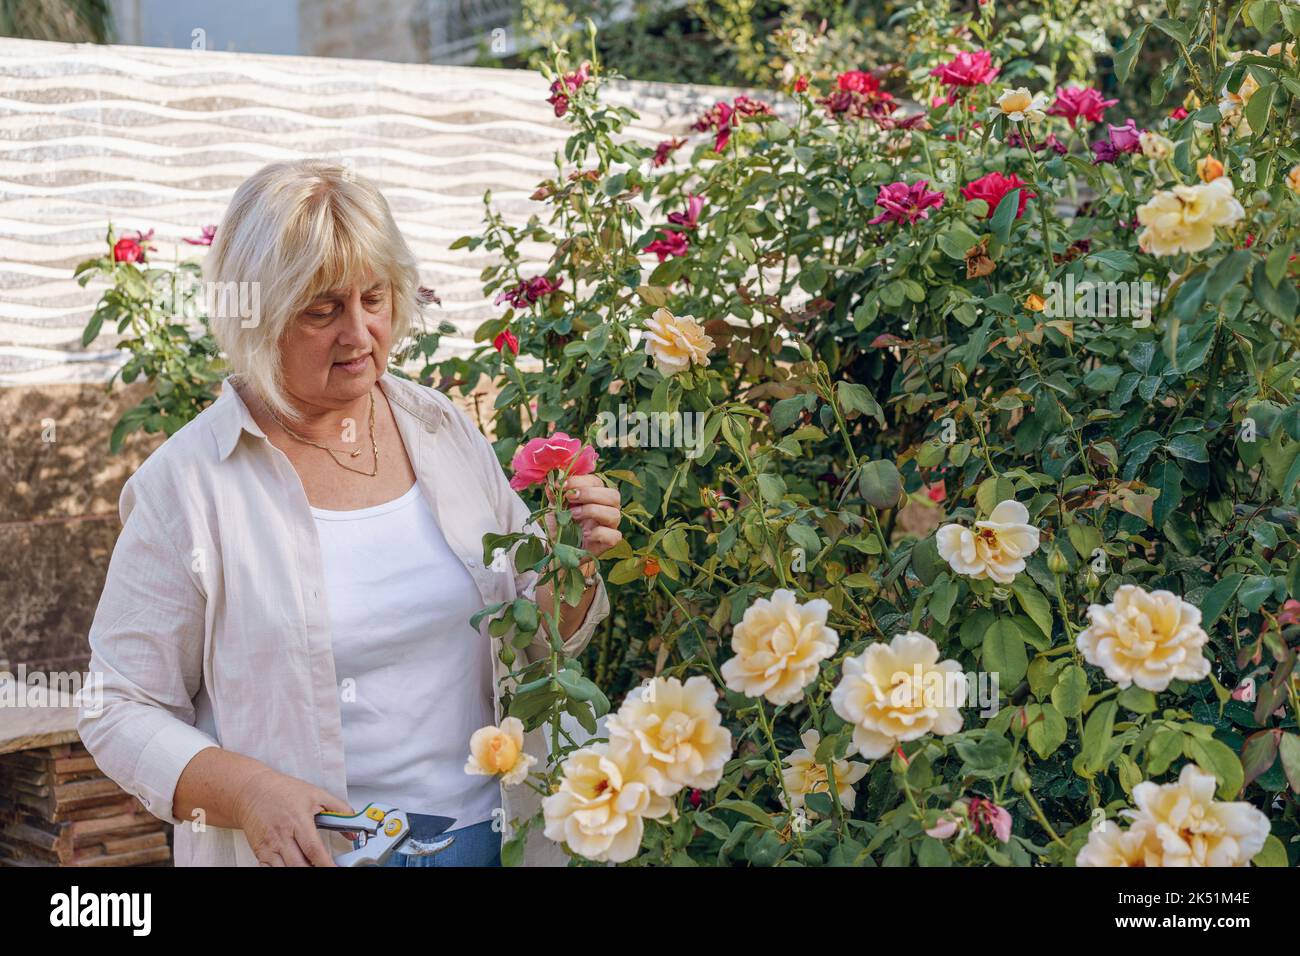 Care of plants in the garden. Senior woman with garden pruners cuts off dry buds. Stock Photo